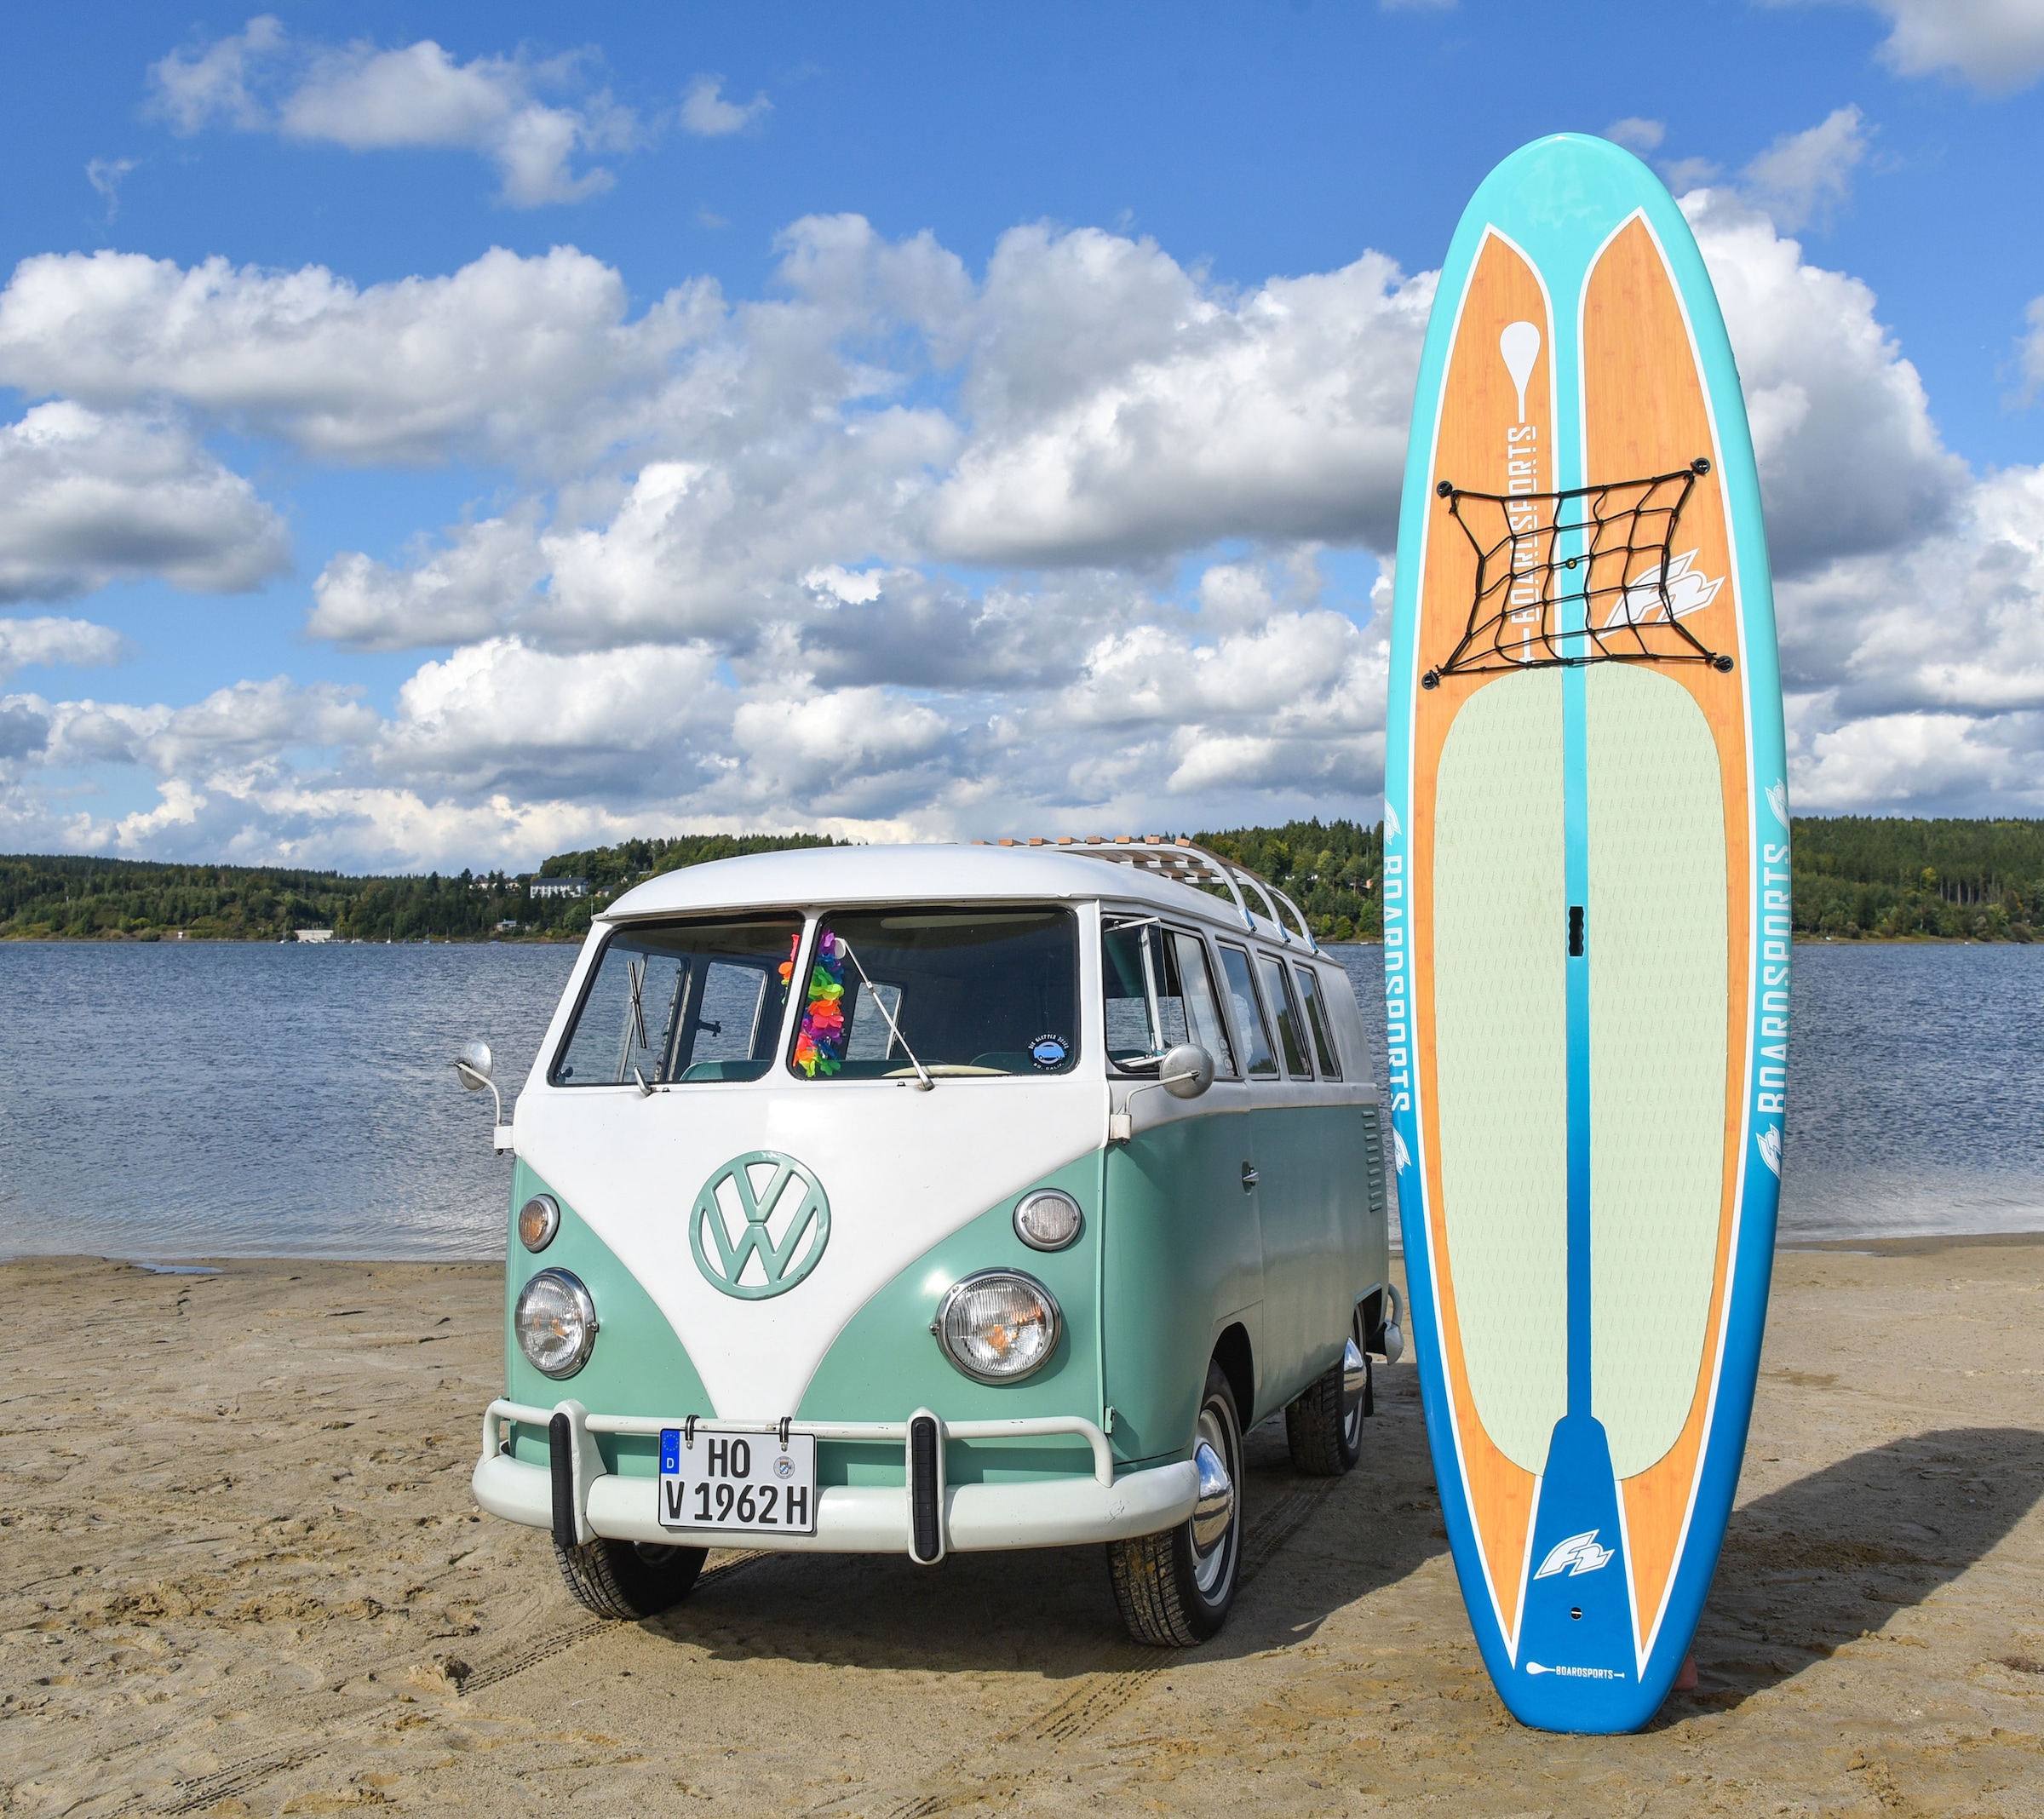 bei kaufen | online SUP-Boards Paddle jetzt Stand-Up